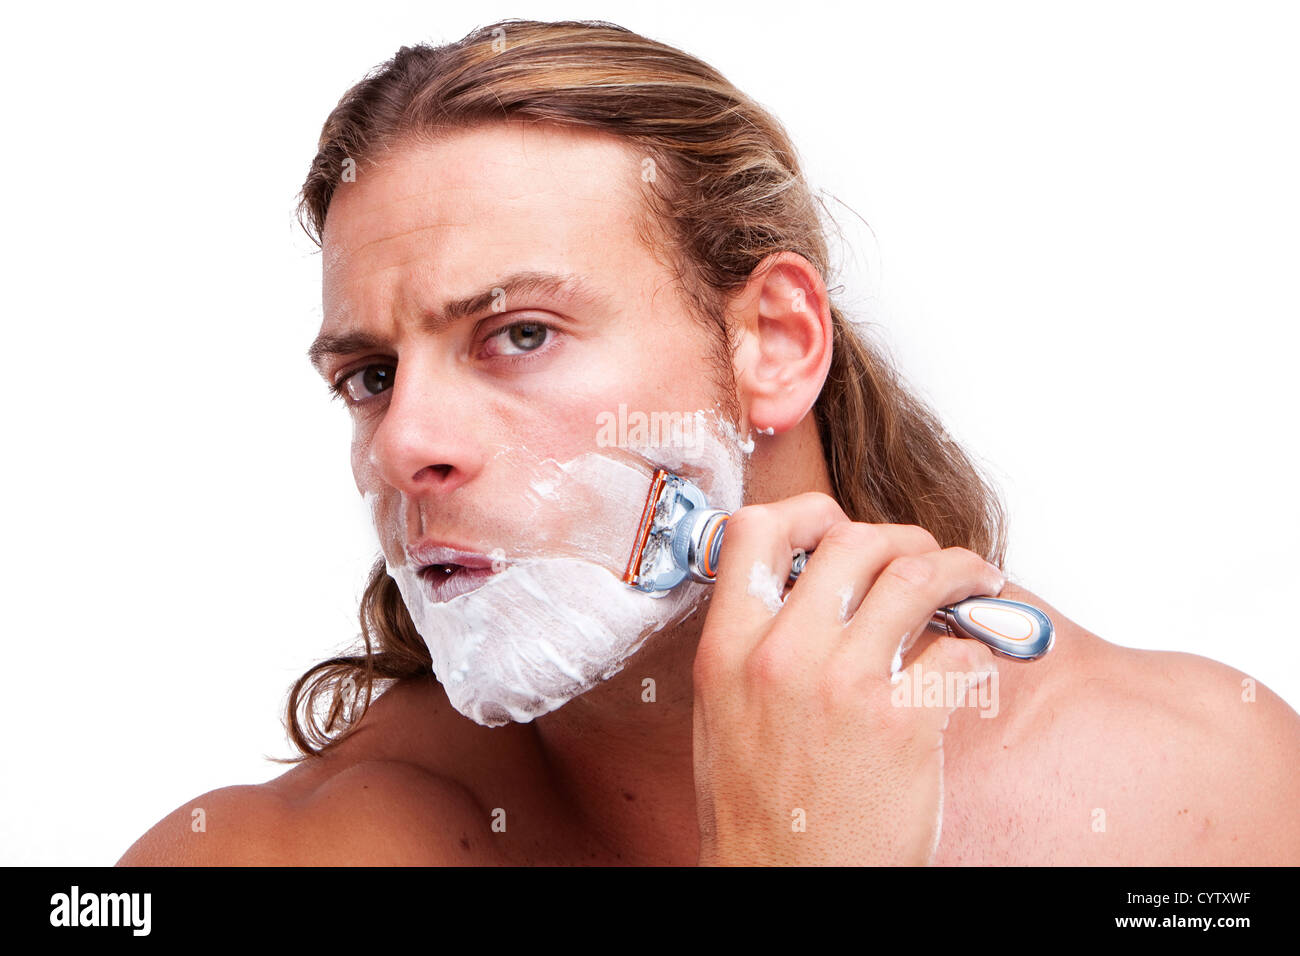 Portrait of a young handsome man shaving as part of his morning routine. Stock Photo